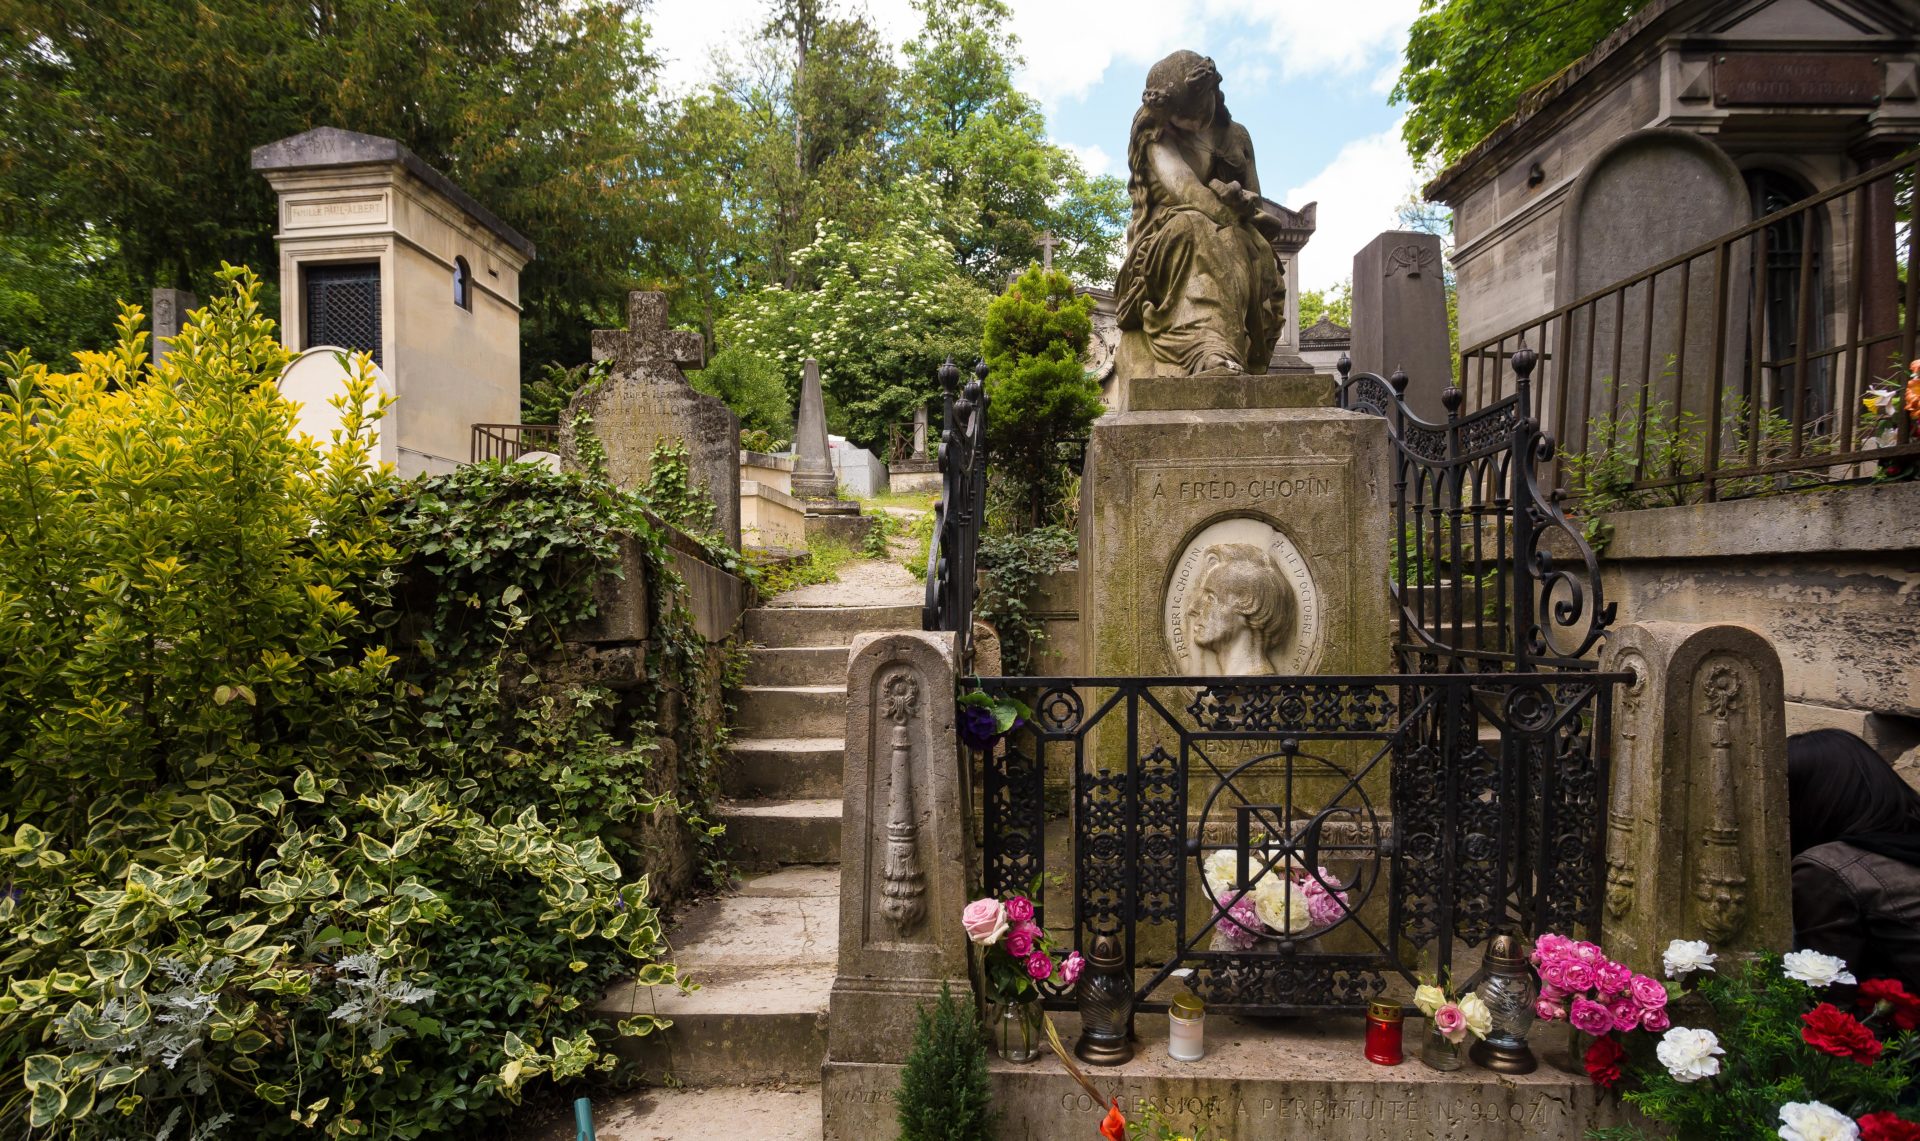 Visit On the footsteps of great men at "Pere Lachaise" cemetery - Tomb of Chopin